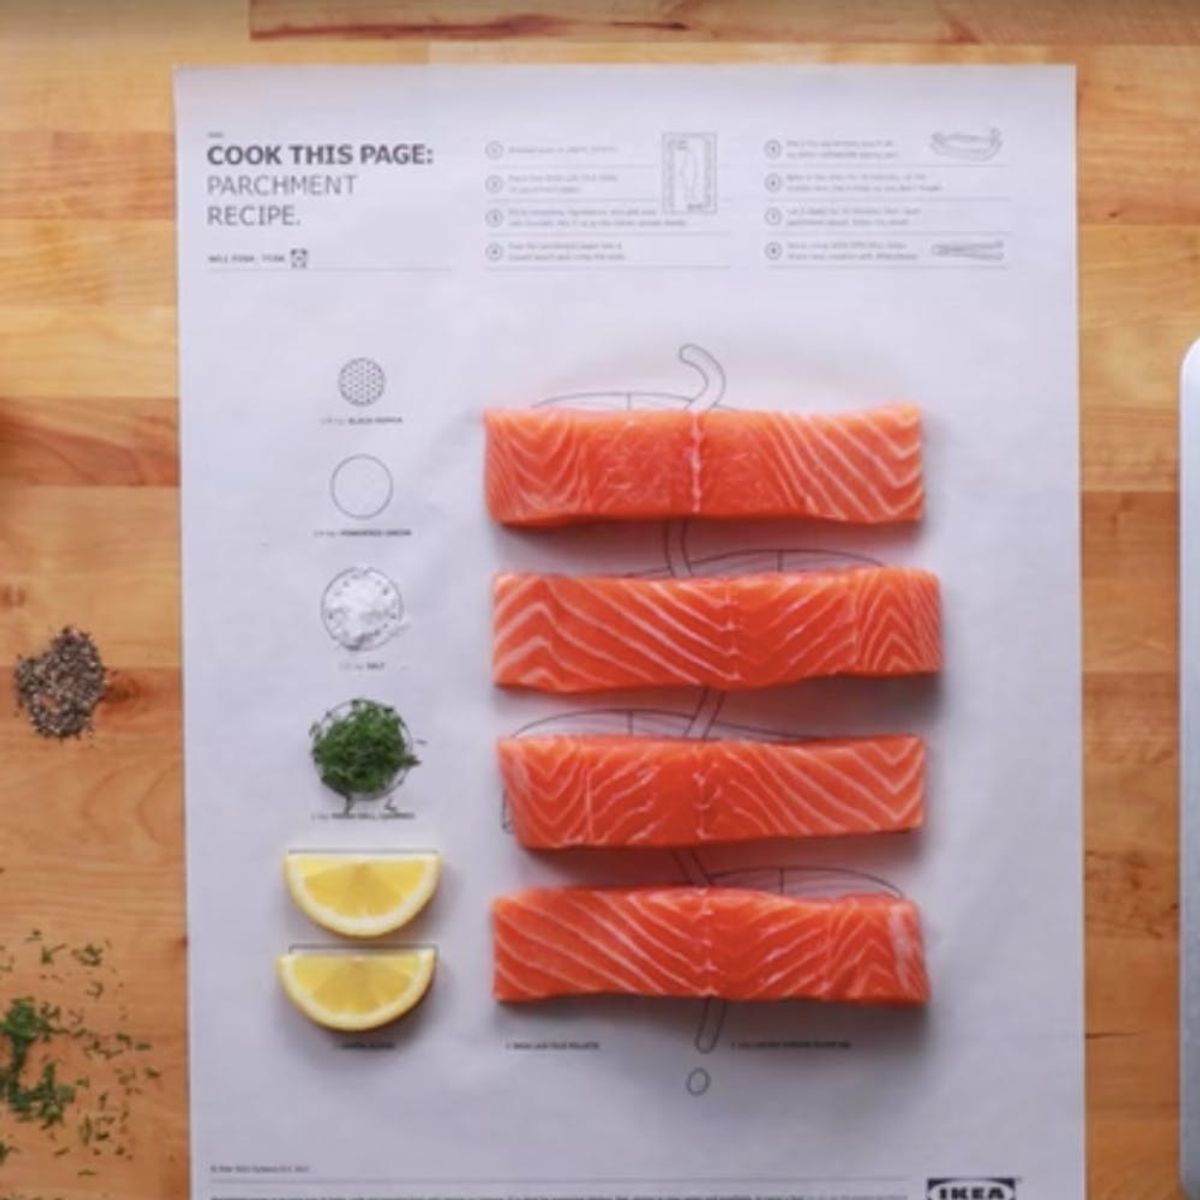 Ikea’s “Cook This Page” Makes Cooking New Recipes Easier Than Ever Before